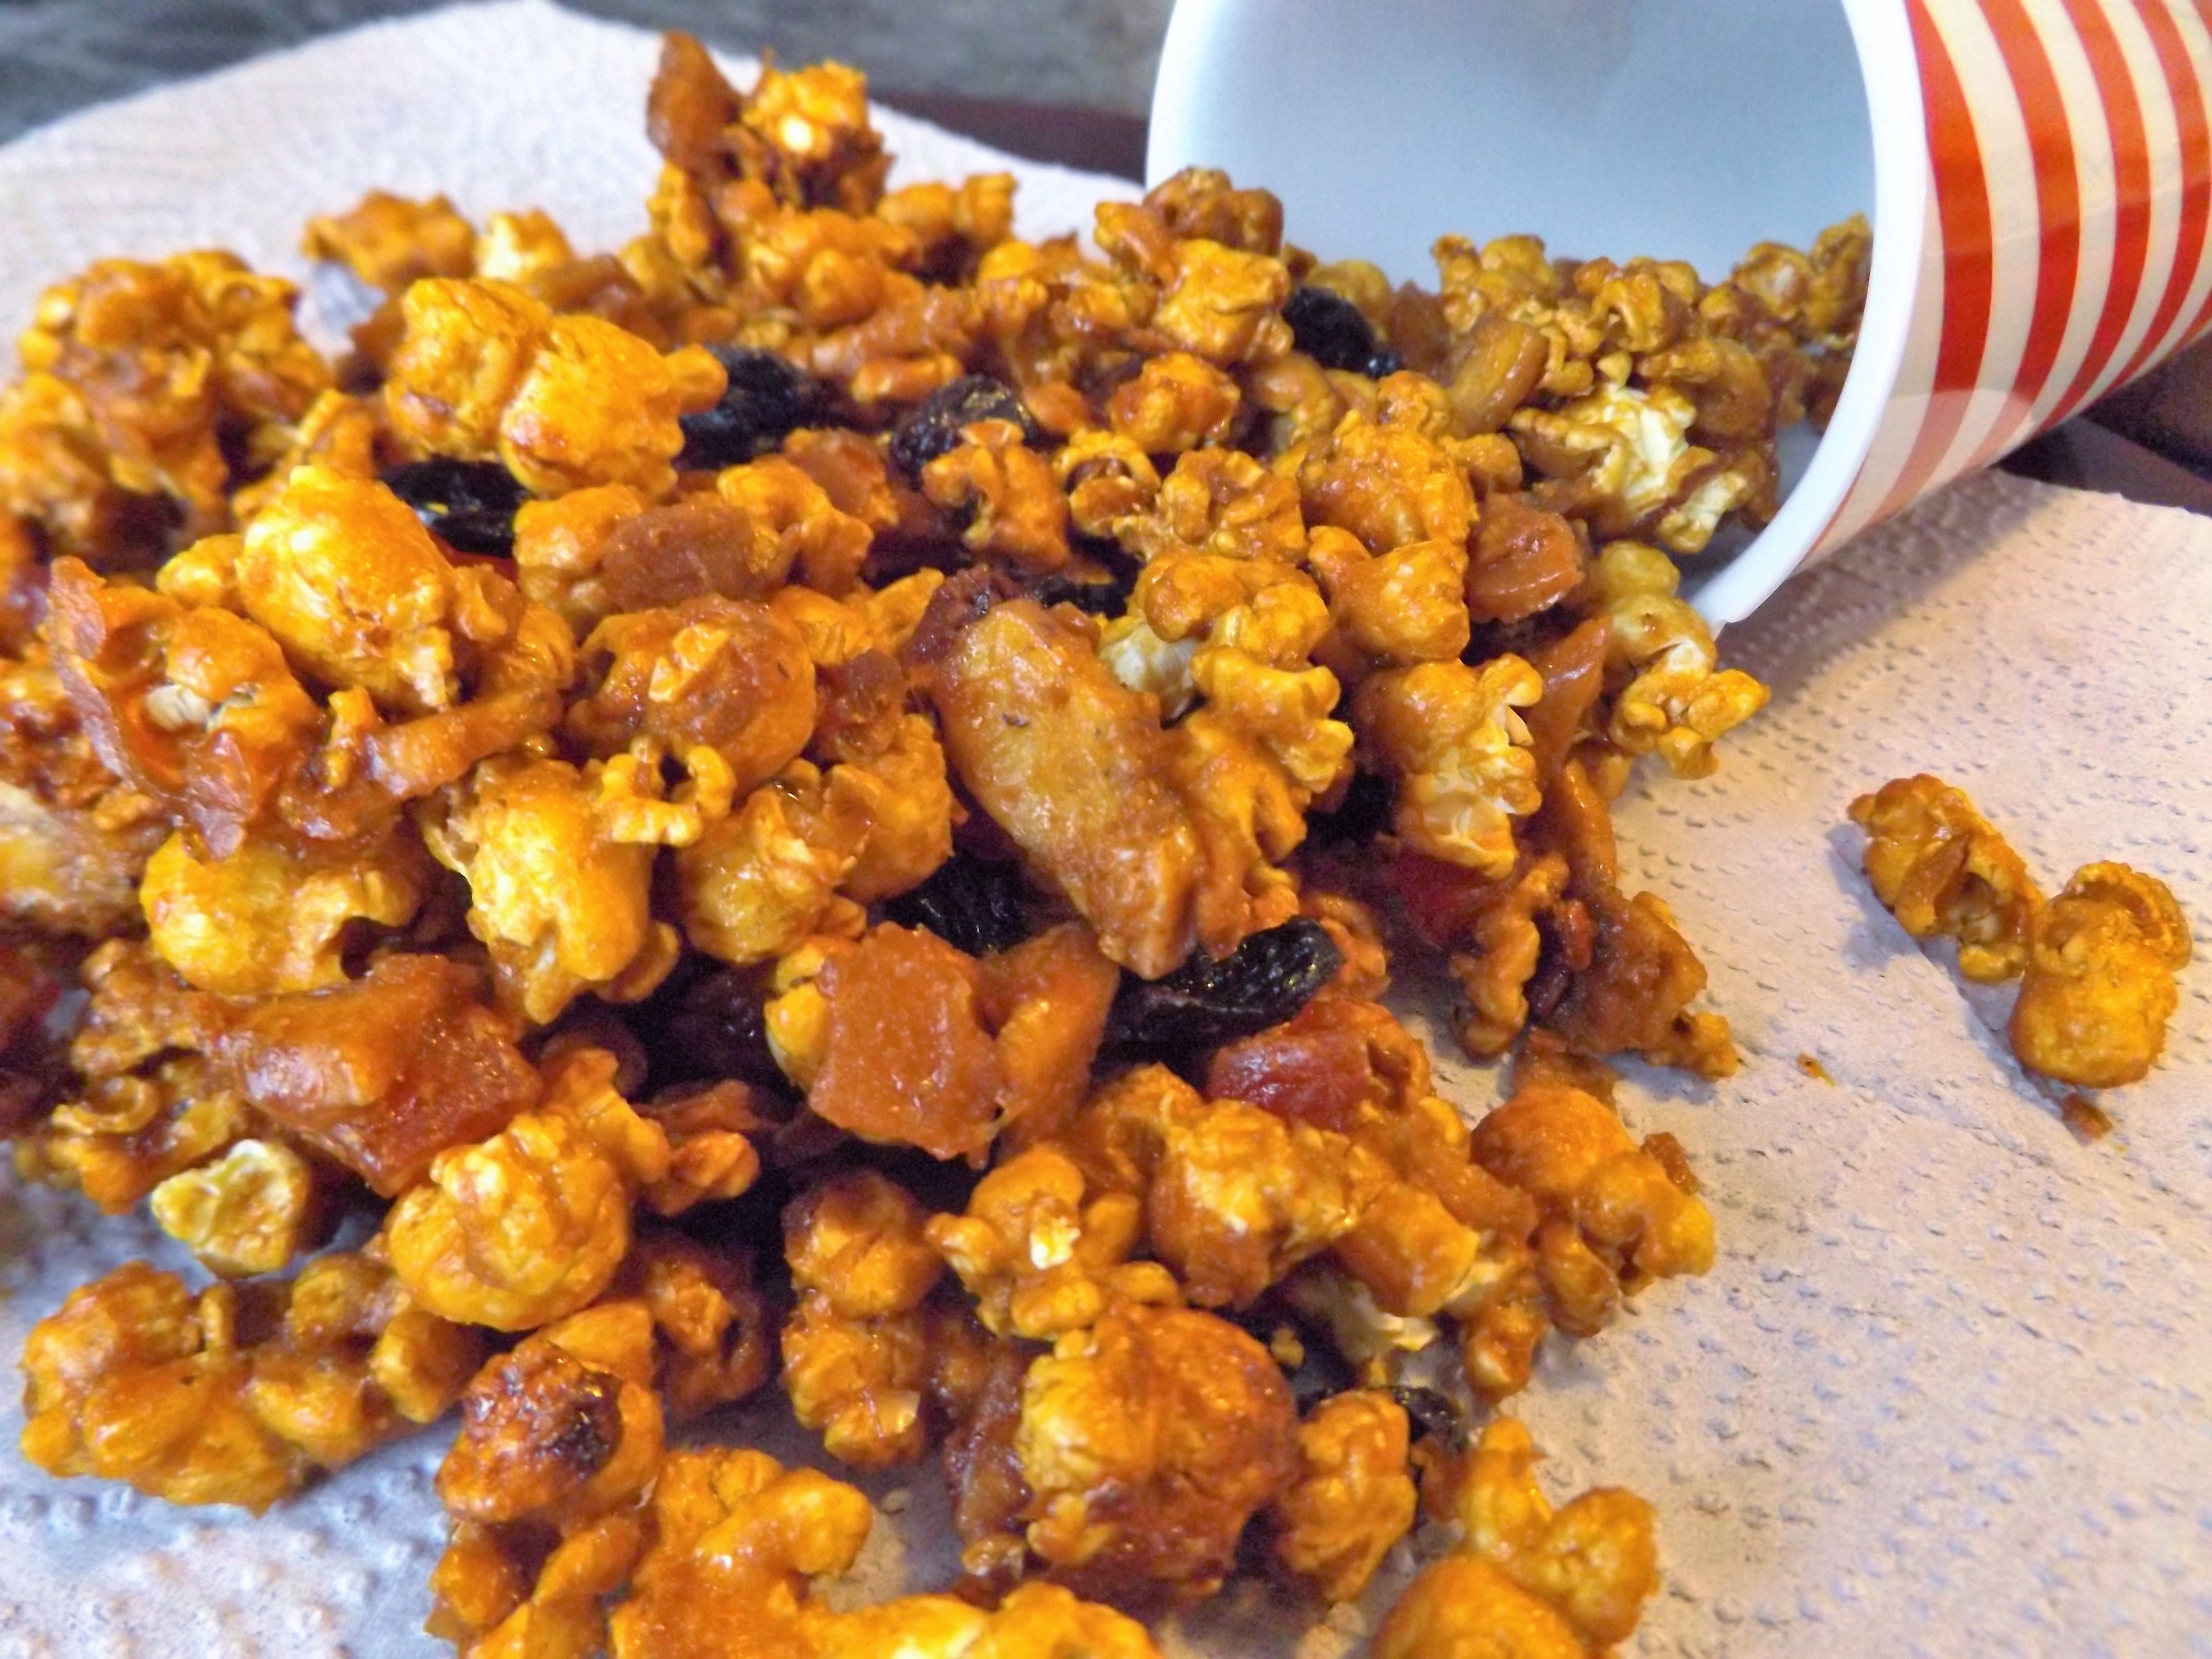 Use all nuts (roughly broken) of your choice, dried fruit of your choice or simply omit them all together and just enjoy crispy, spiced caramel popcorn. I use buttered and salted popcorn because everything just seems to go so well together.